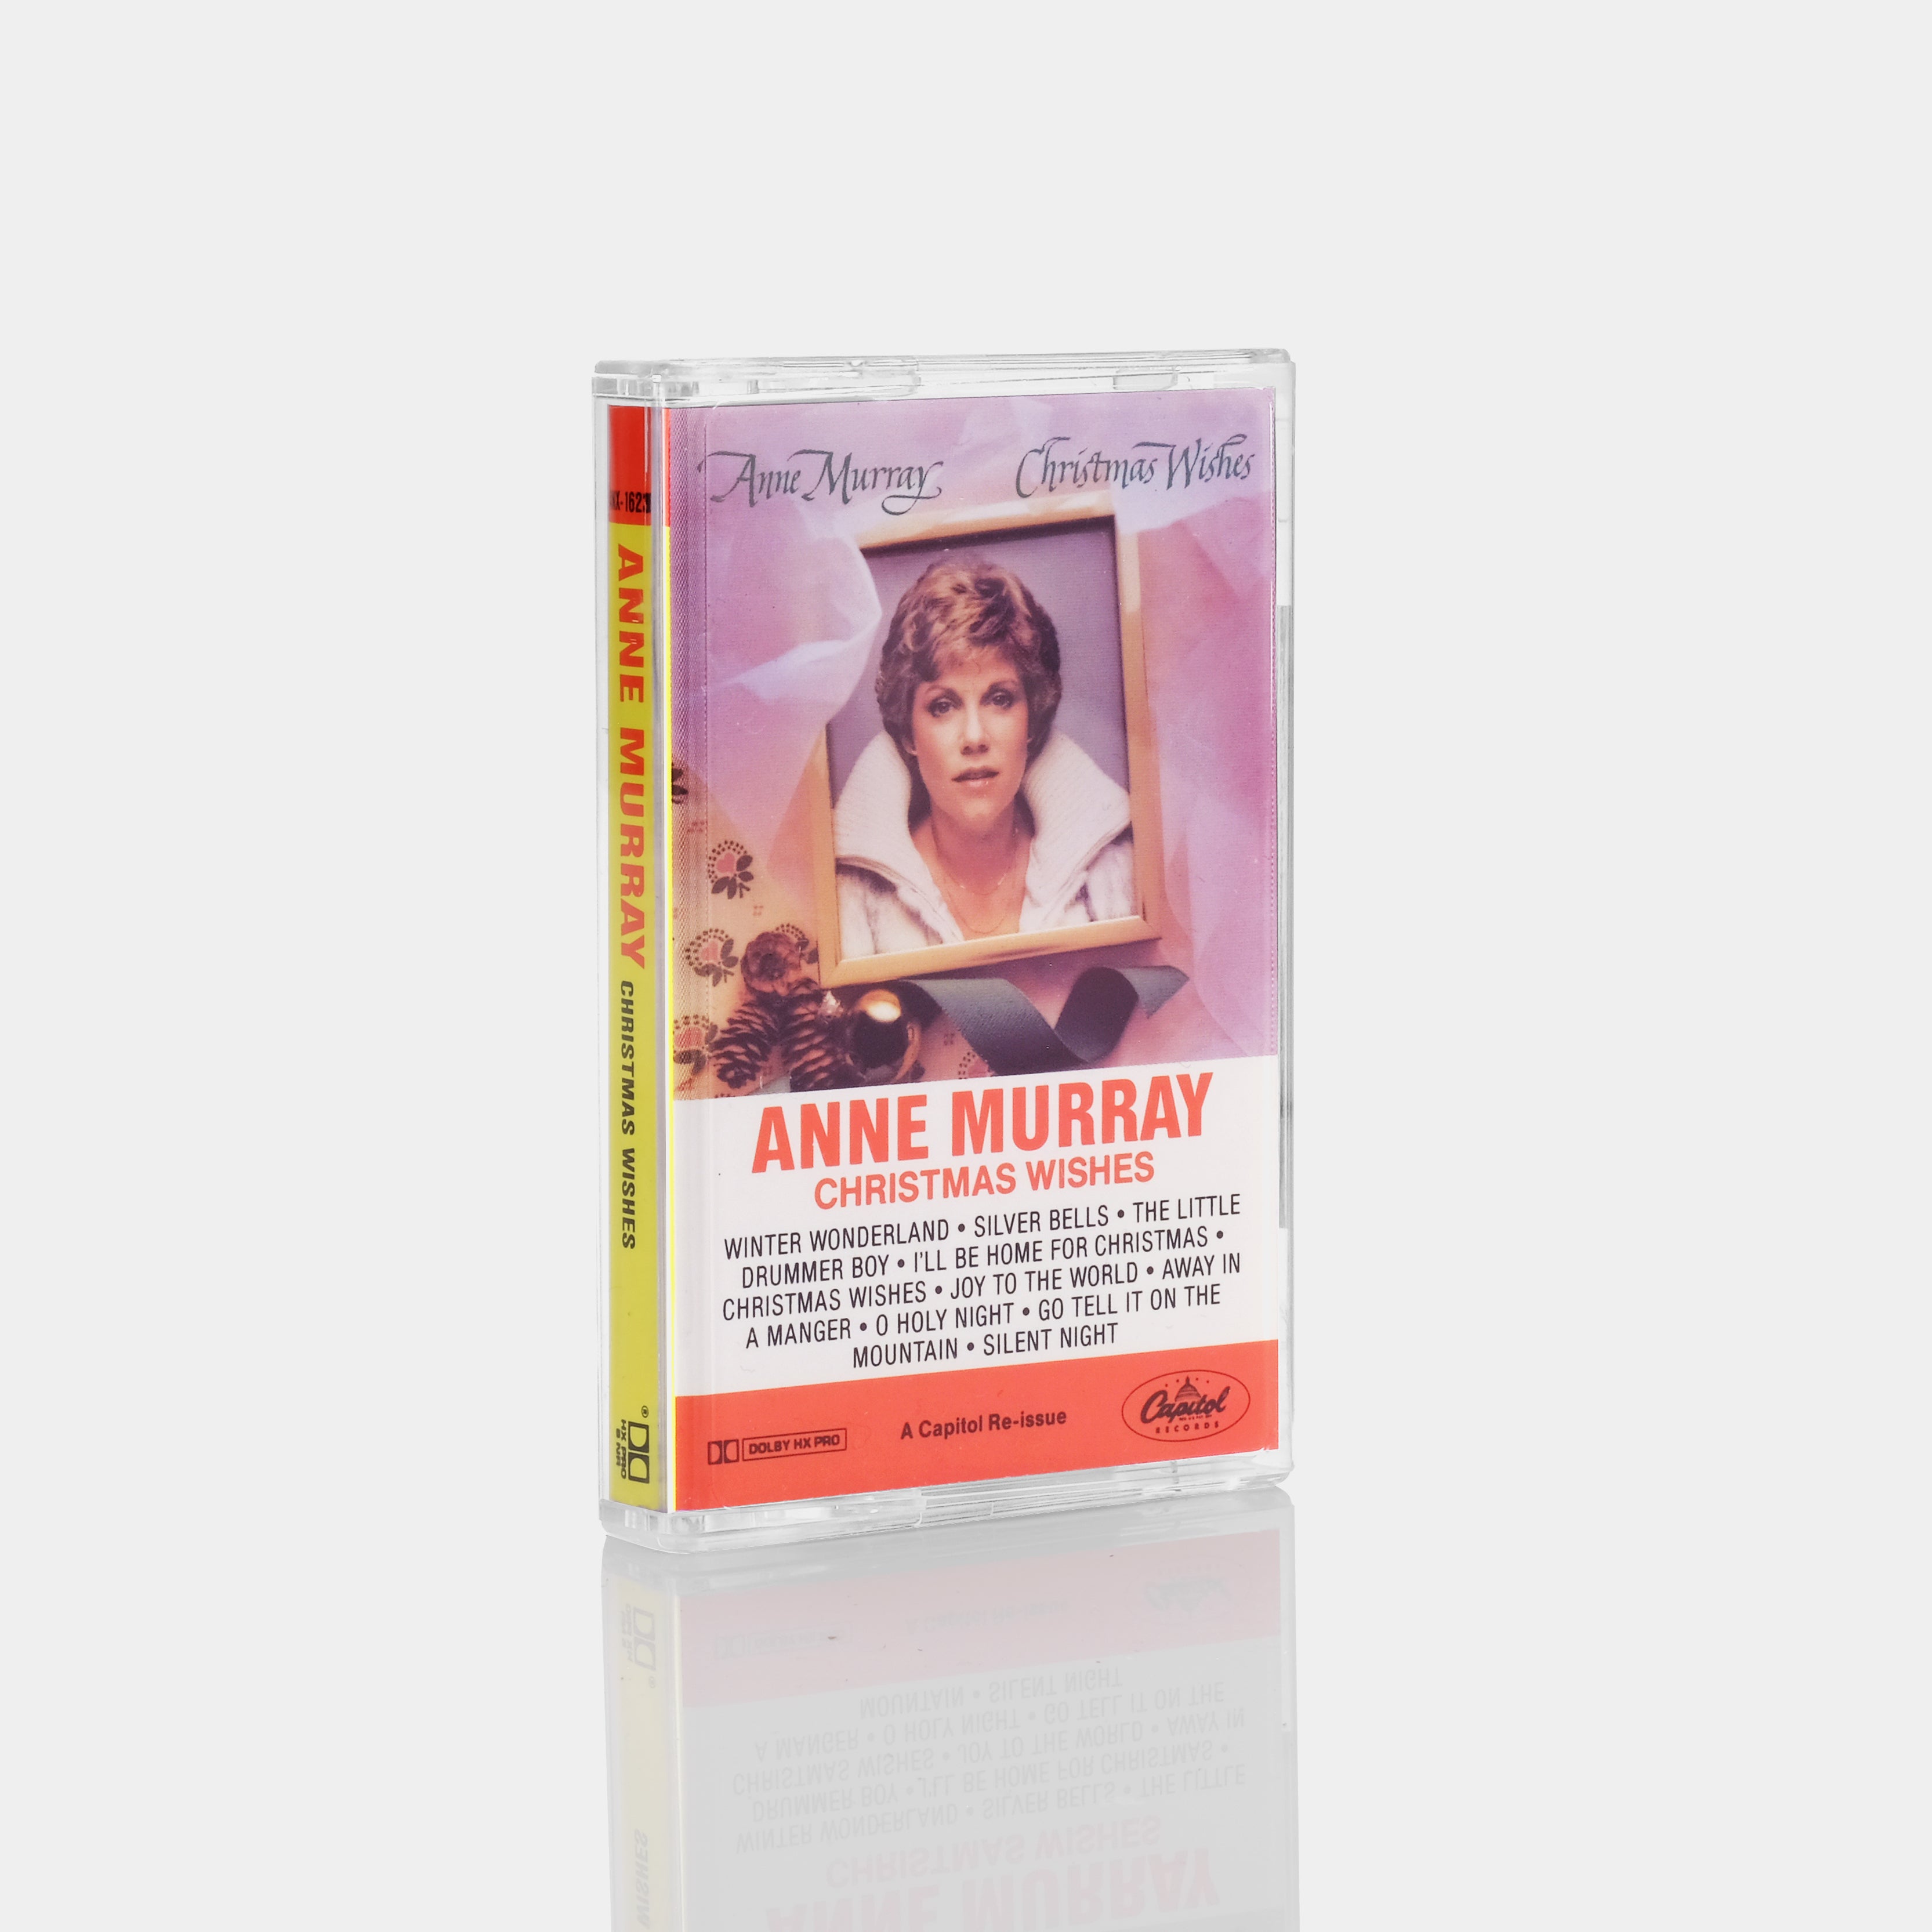 Anne Murray - Christmas Wishes Cassette Tape